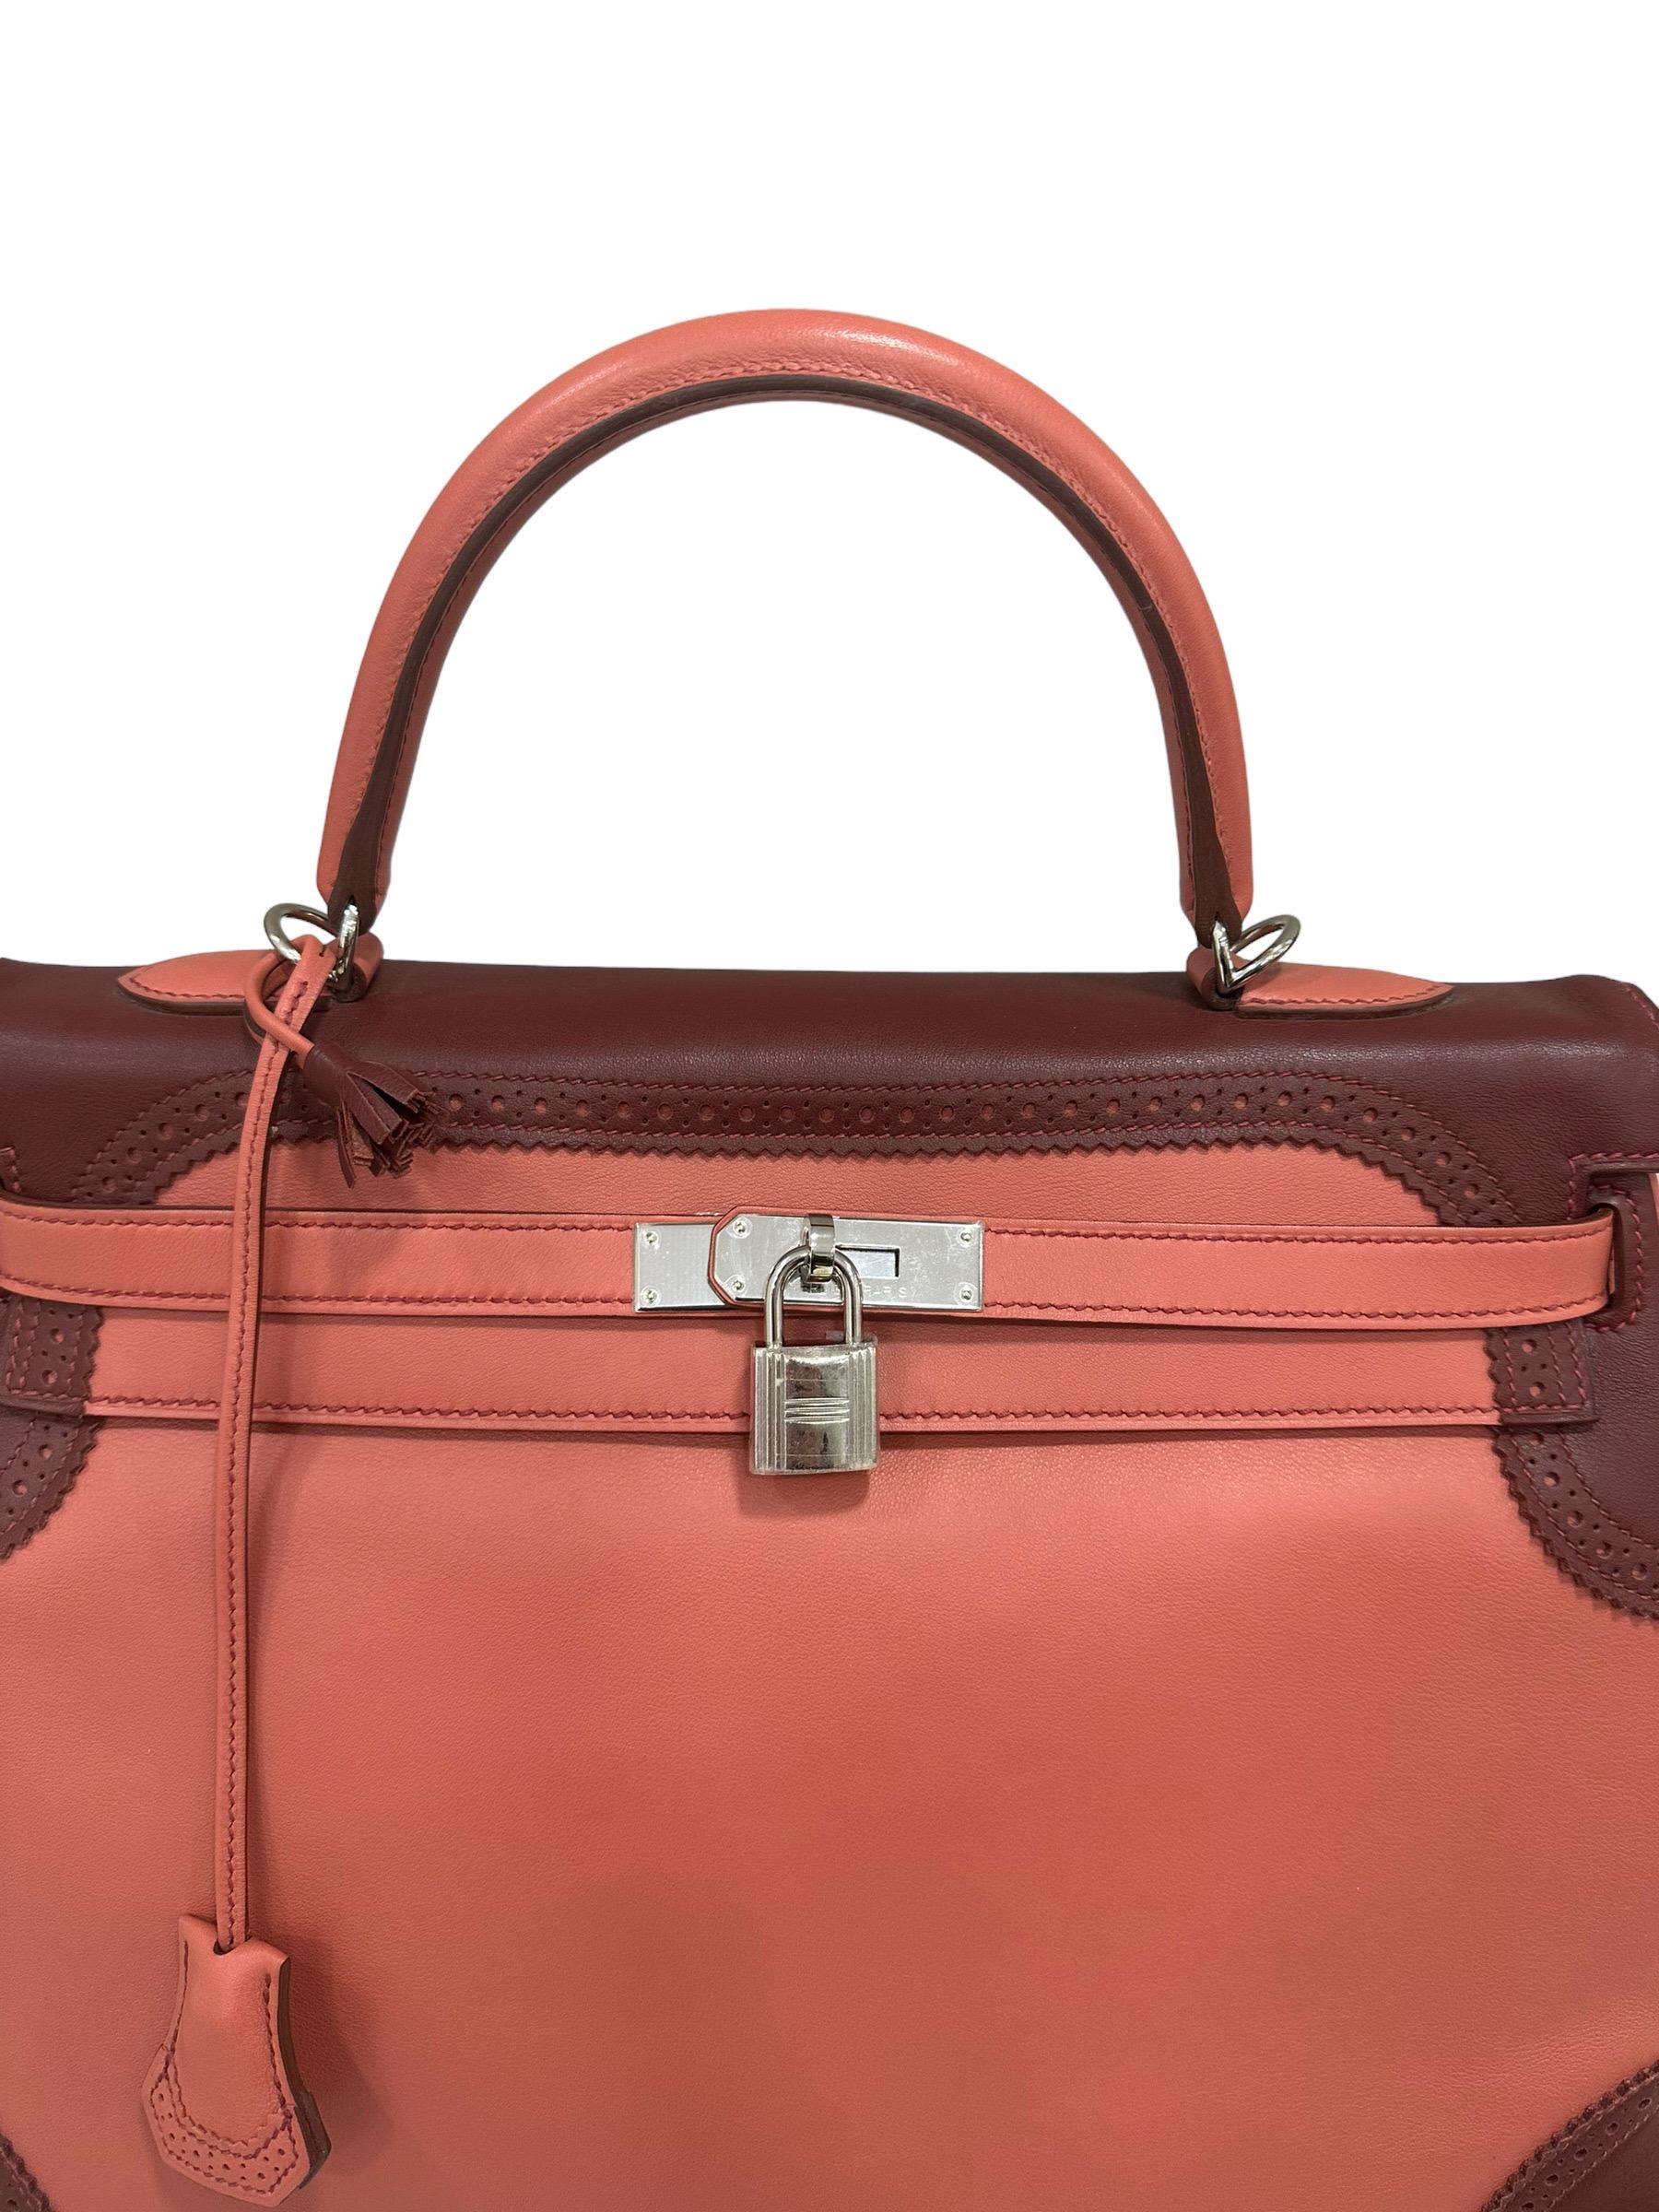 2012 Hermès Kelly 35 Ghillies Evercalf Rose Texas/Rouge H For Sale 9